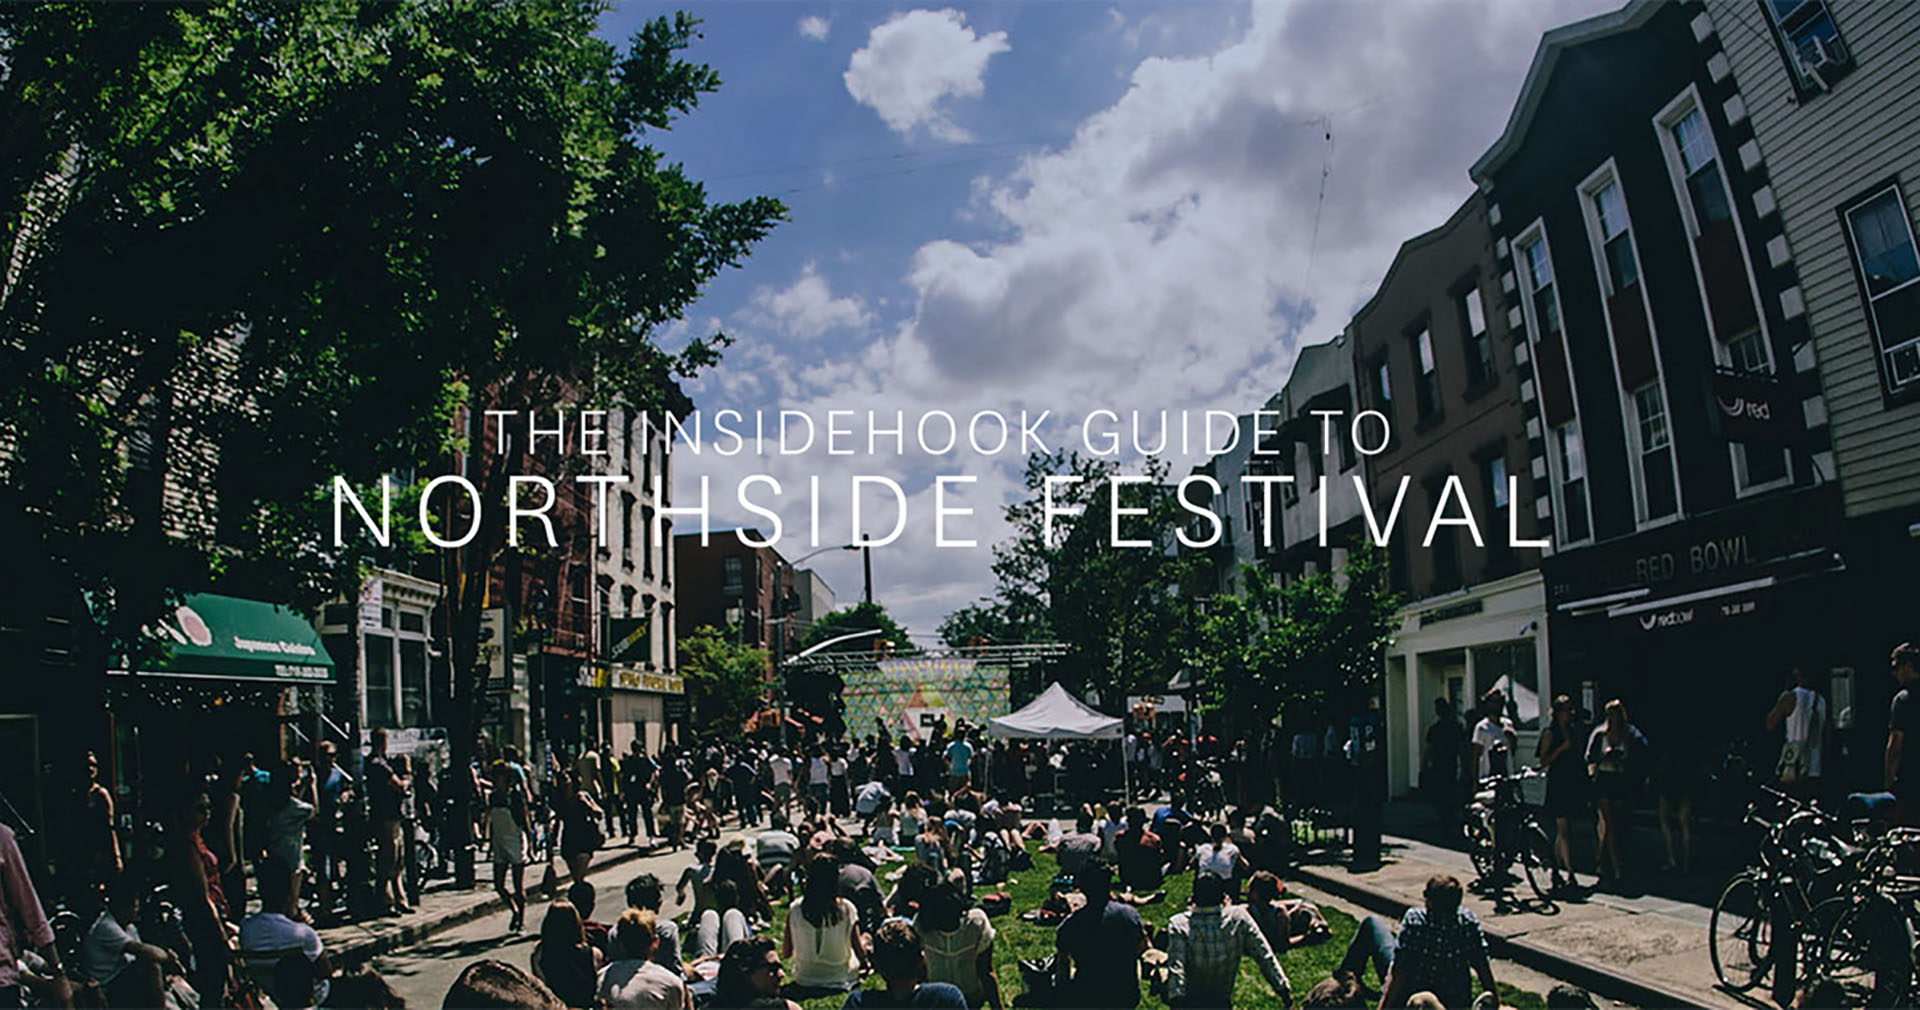 The InsideHook Guide to Northside Festival